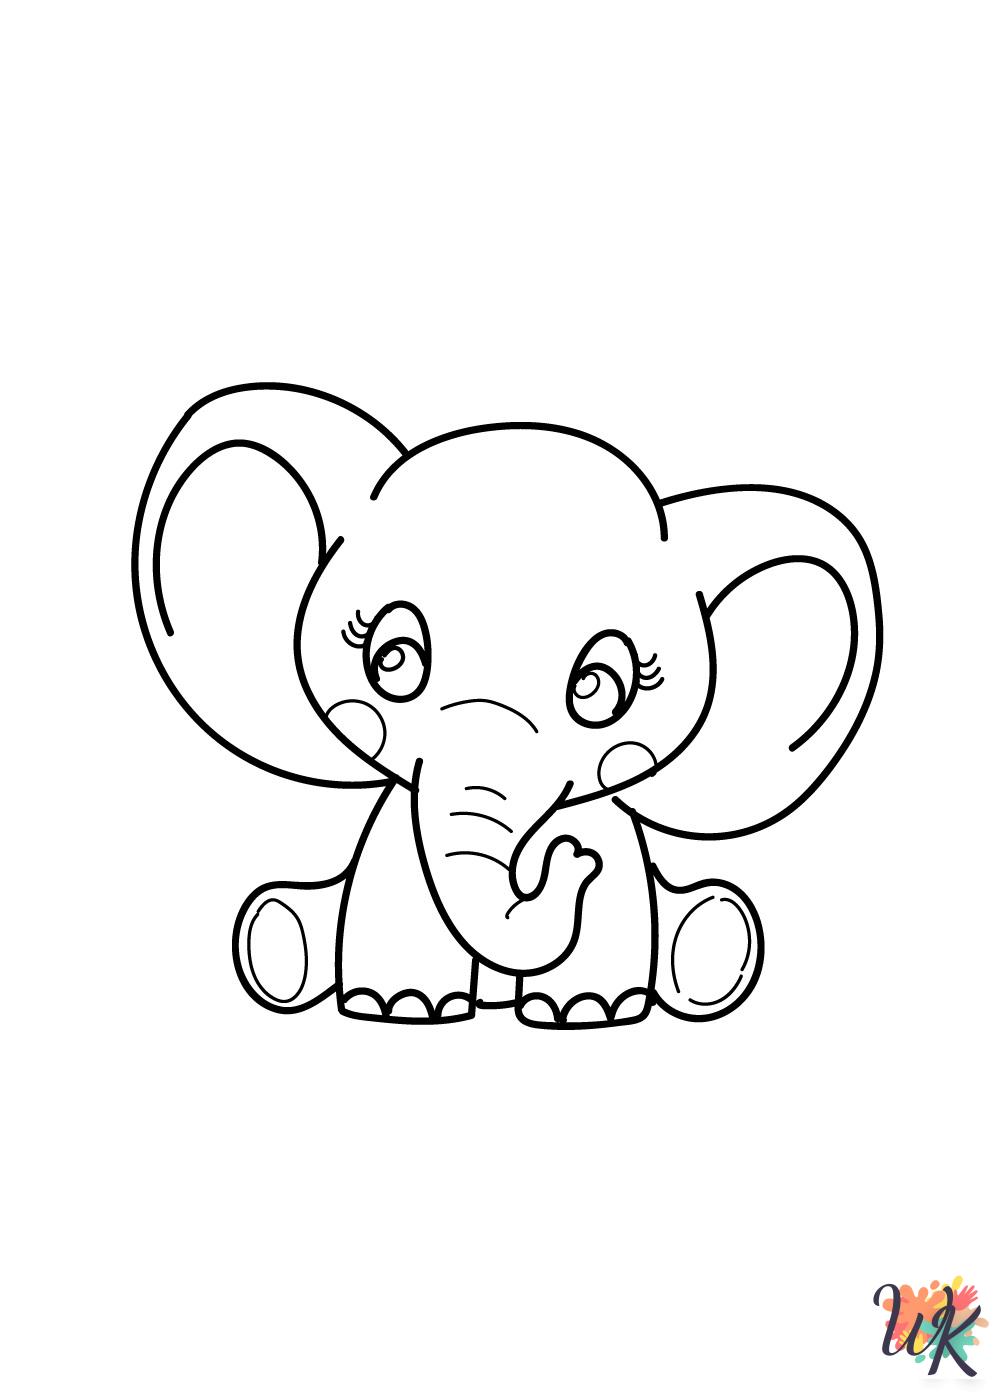 Cute Animals coloring pages pdf